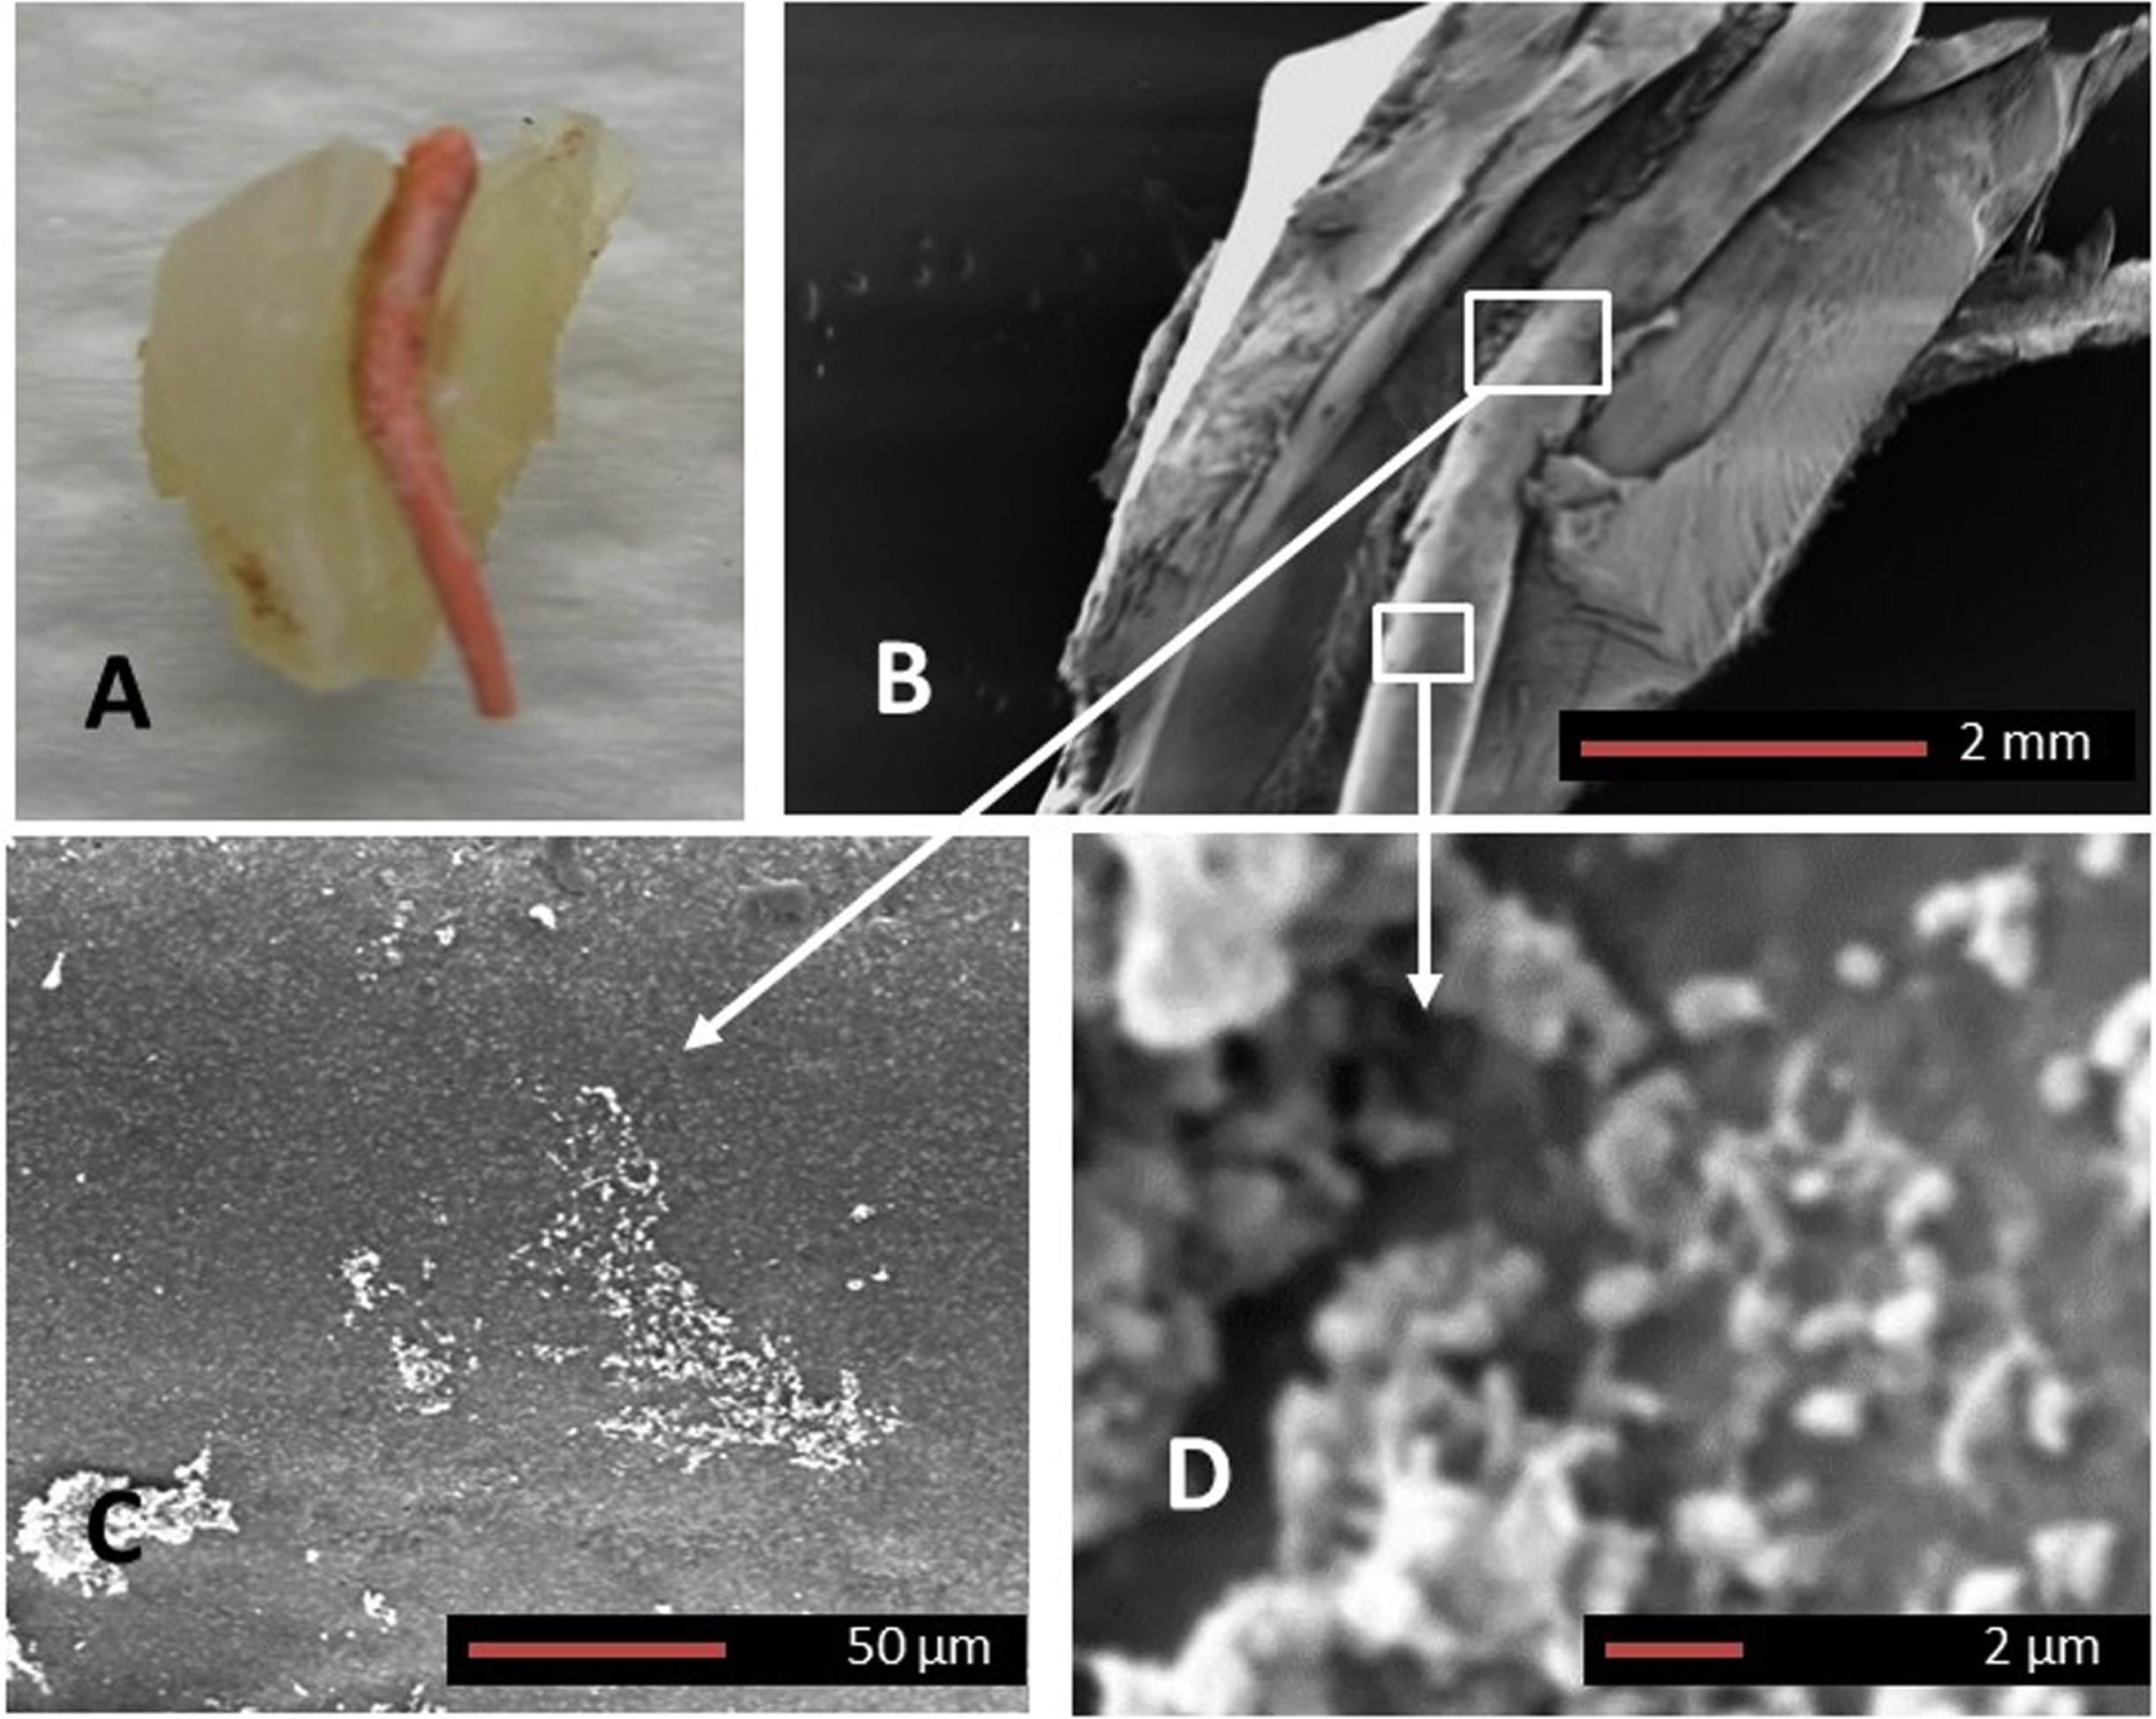 Gutta percha biofilm SEM. A) Macroscopic image of an extracted human tooth with a history of failed root canal treatment which was sectioned longitudinally exposing the intact gutta percha. B) SEM image of the gutta percha within the root canal. Higher magnifications of the white squares in B, demarcated by arrows are shown in C and D. Panels C and D confirm the presence of an early biofilm formation on the gutta percha (Magnifications as per micron bar).